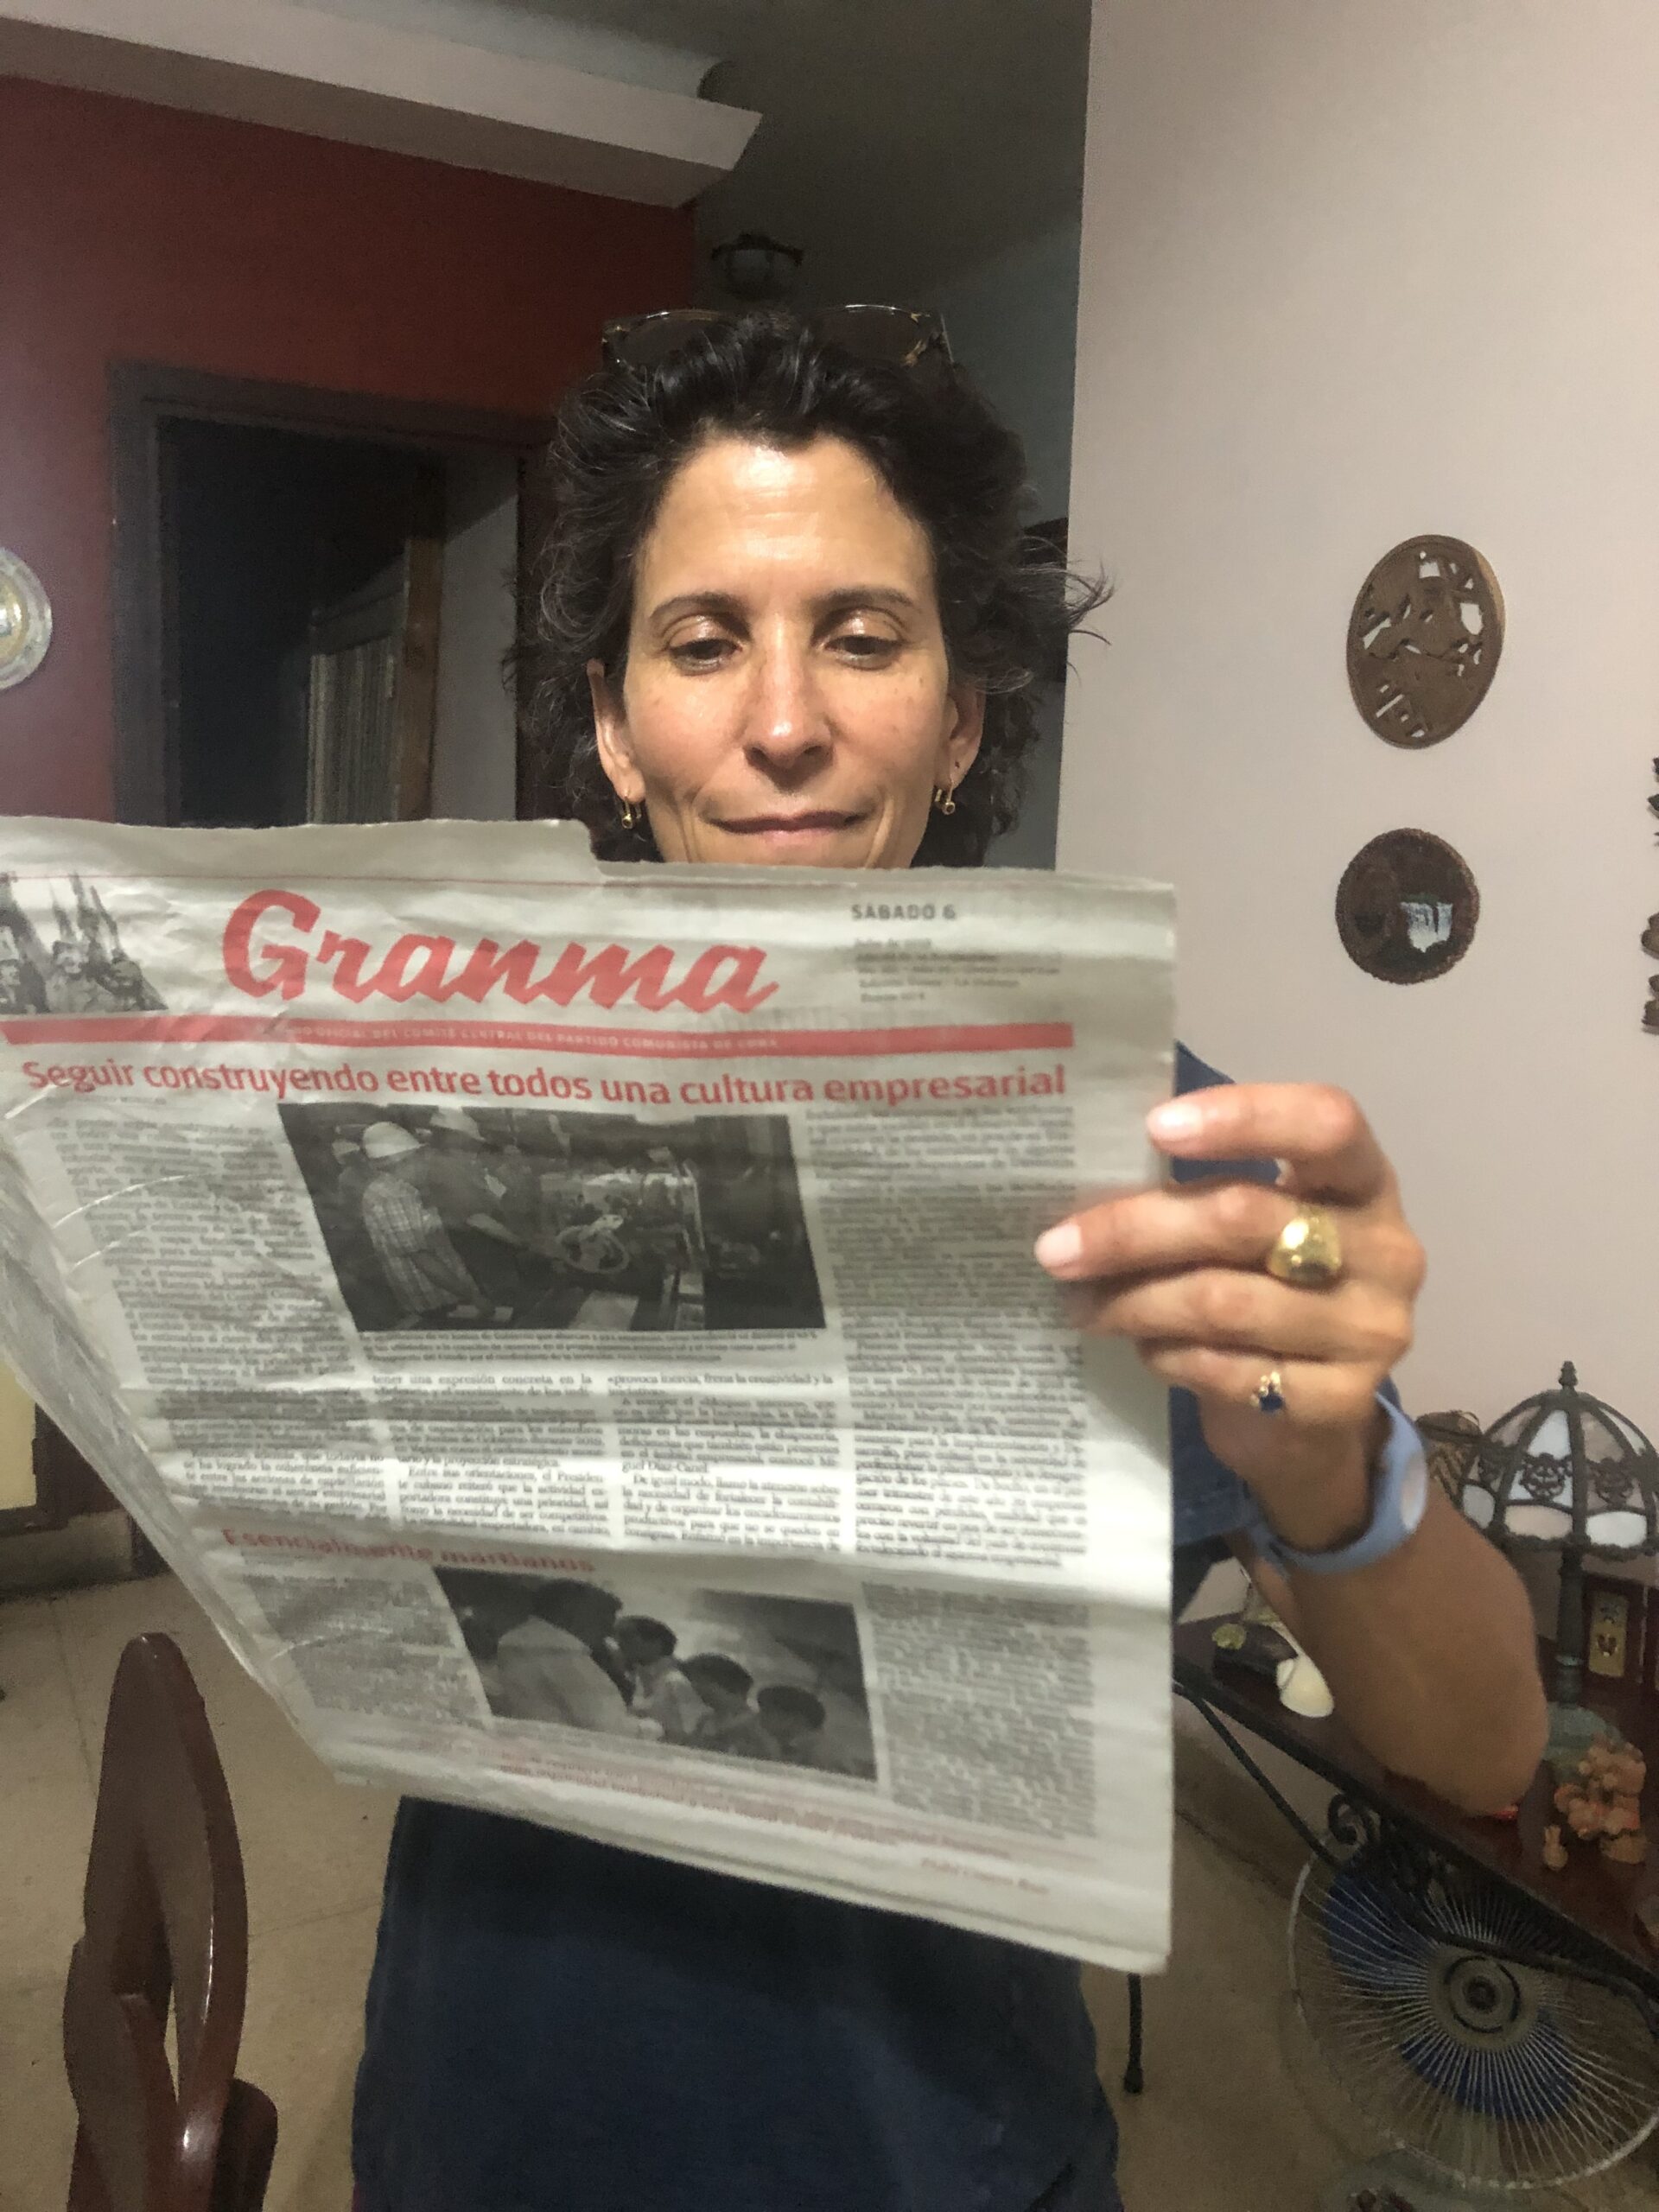 Christiane Arbesu on location in Cuba with a copy of the newspaper Gramma. COURTESY THE ARTIST